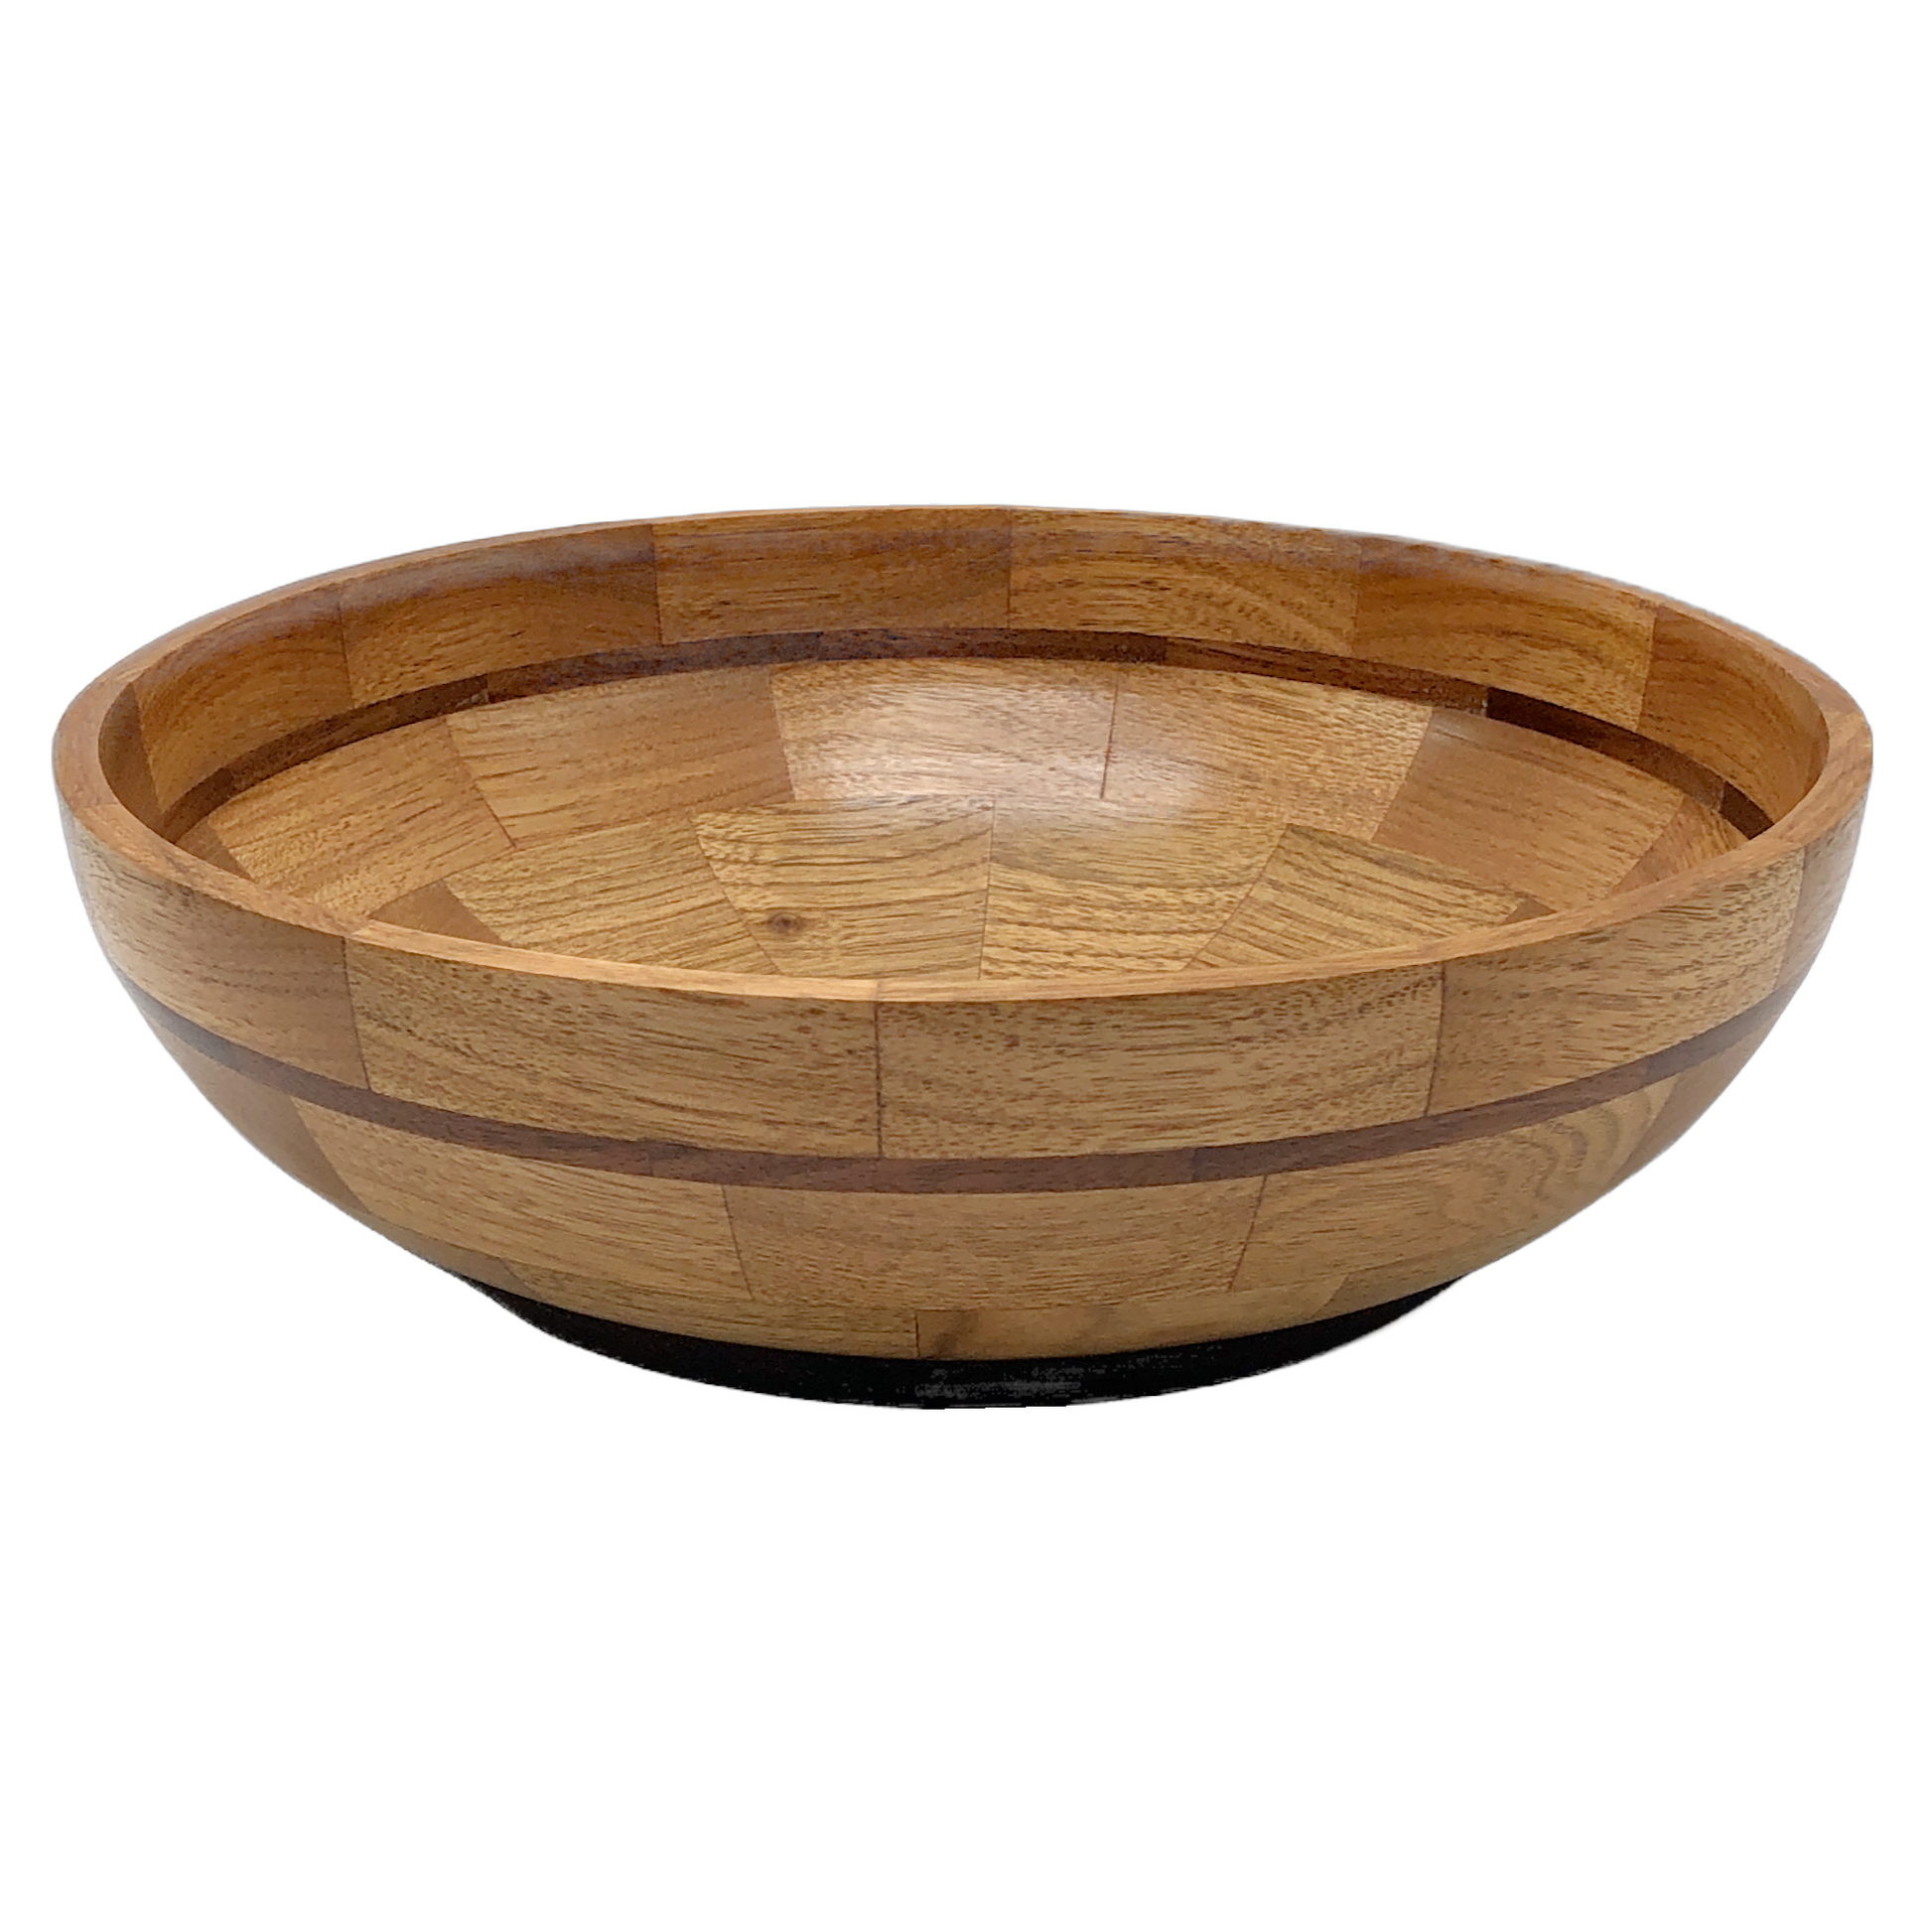 Walnut and butternut wood turned bowl, locally made, fruit or catch-all bowl, harbor springs, hanni gallery